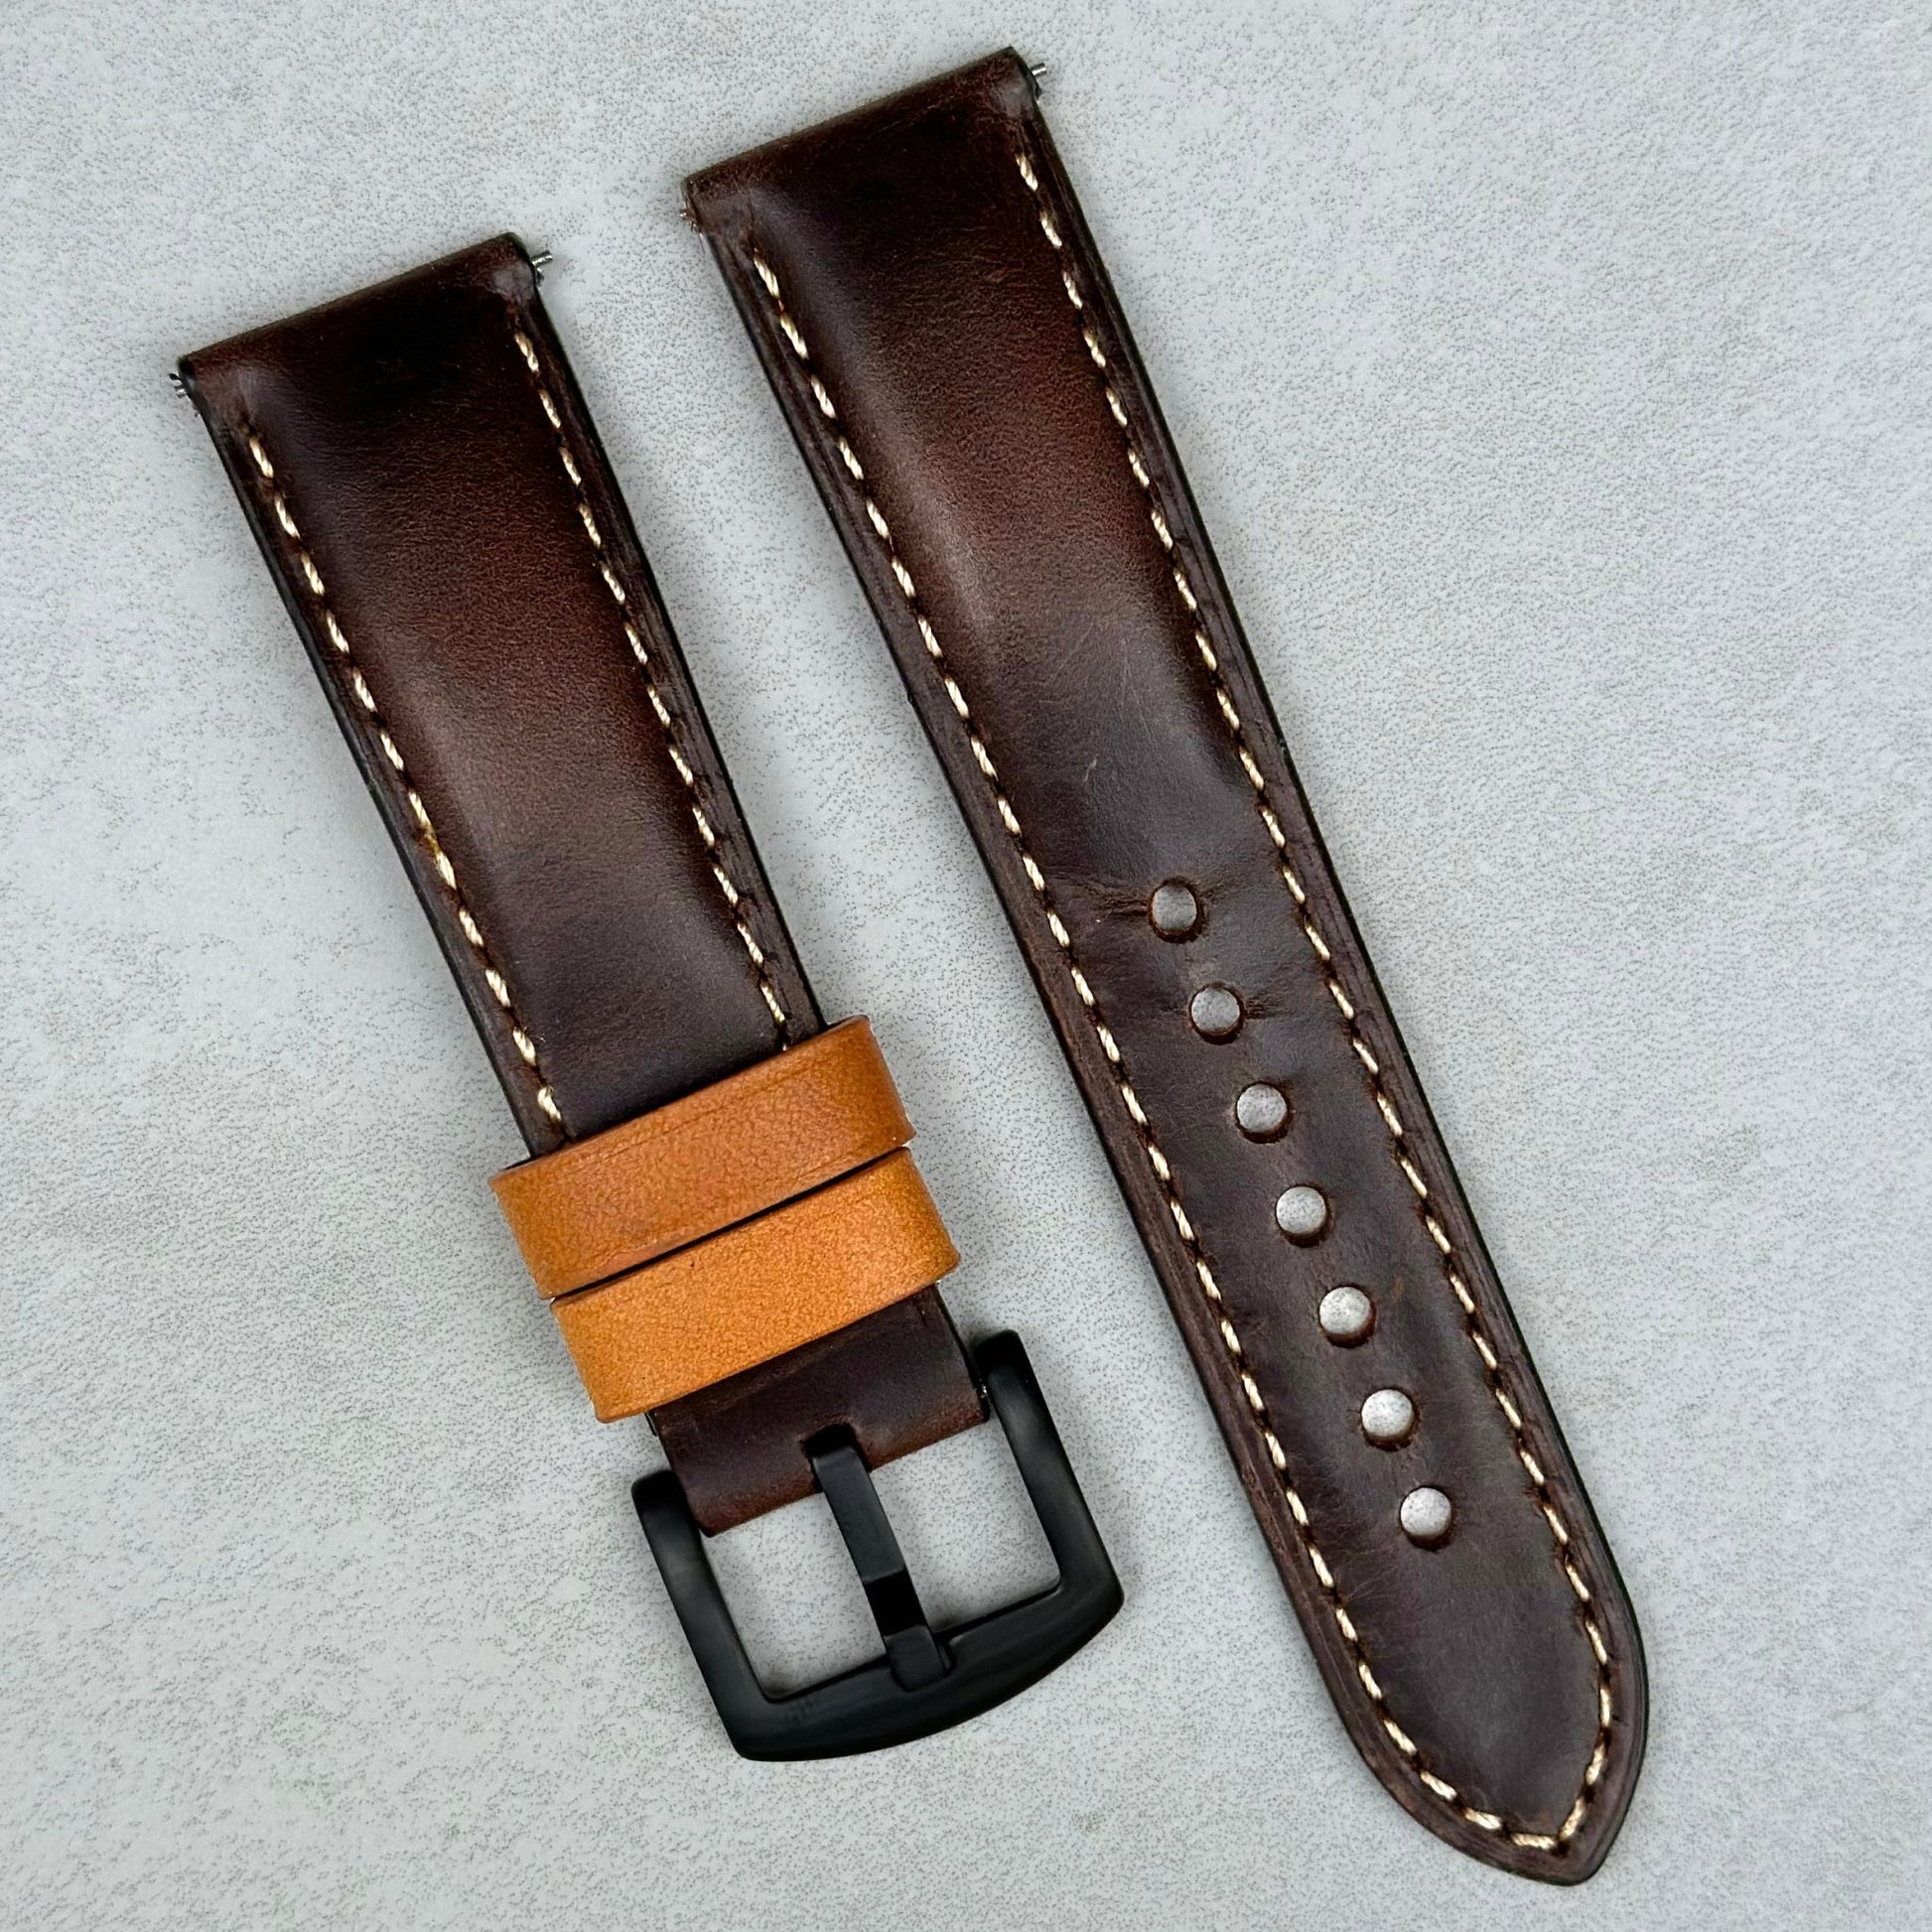 Oxford brown full grain leather watch strap with PVD black buckle. Contrast tan loops. 18mm, 20mm, 22mm, 24mm Watch And Strap